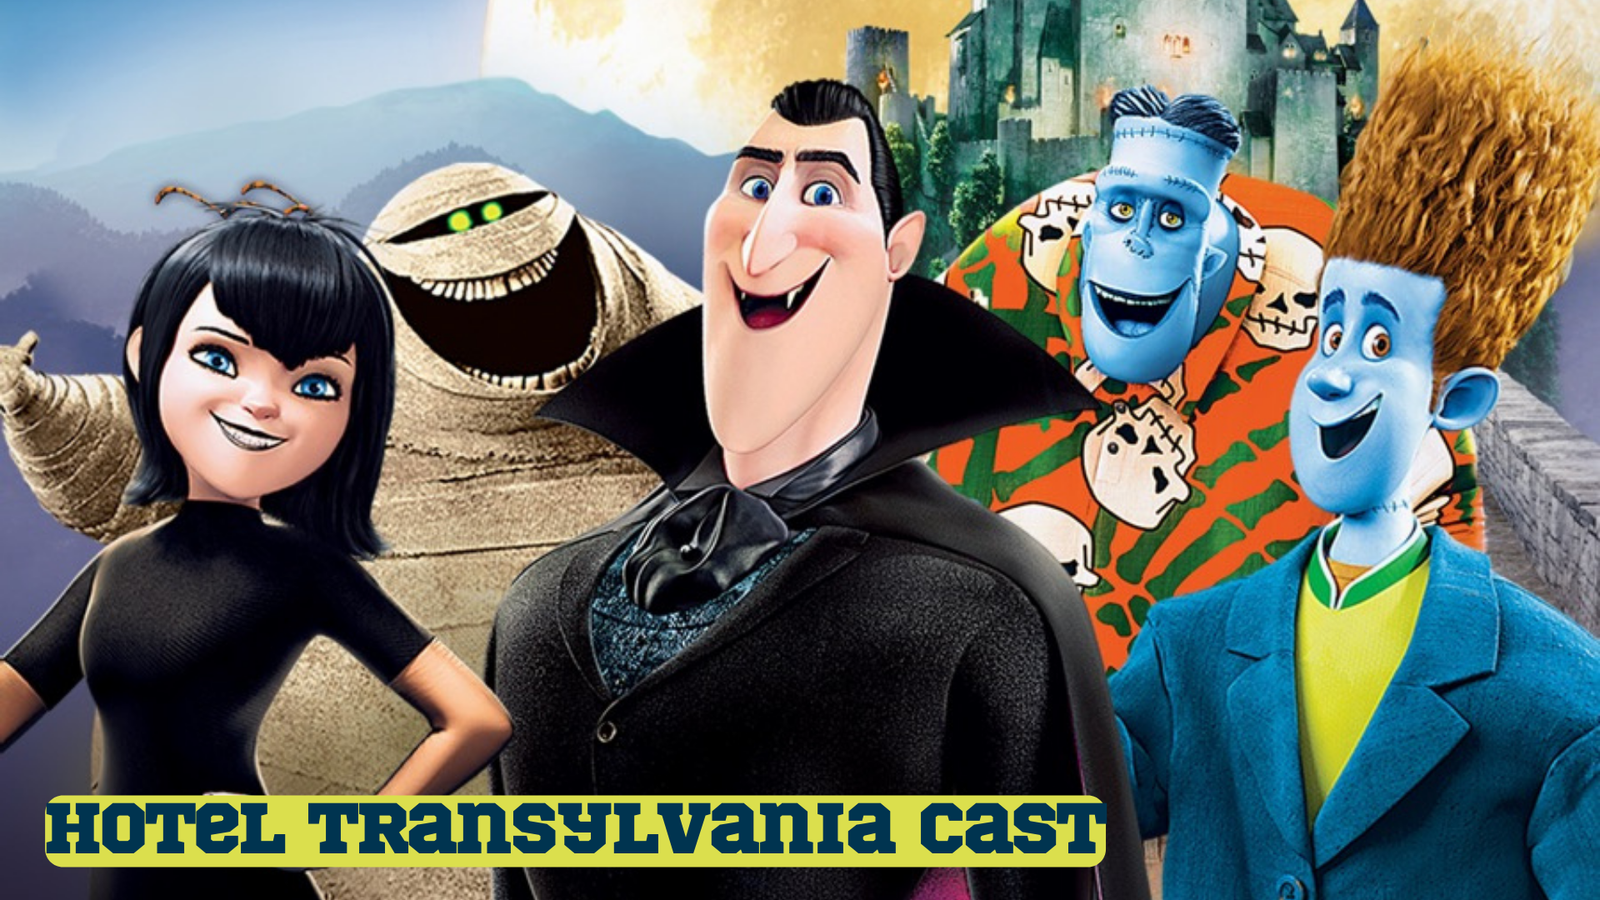 Hotel Transylvania Cast - Ages, Partners, Characters